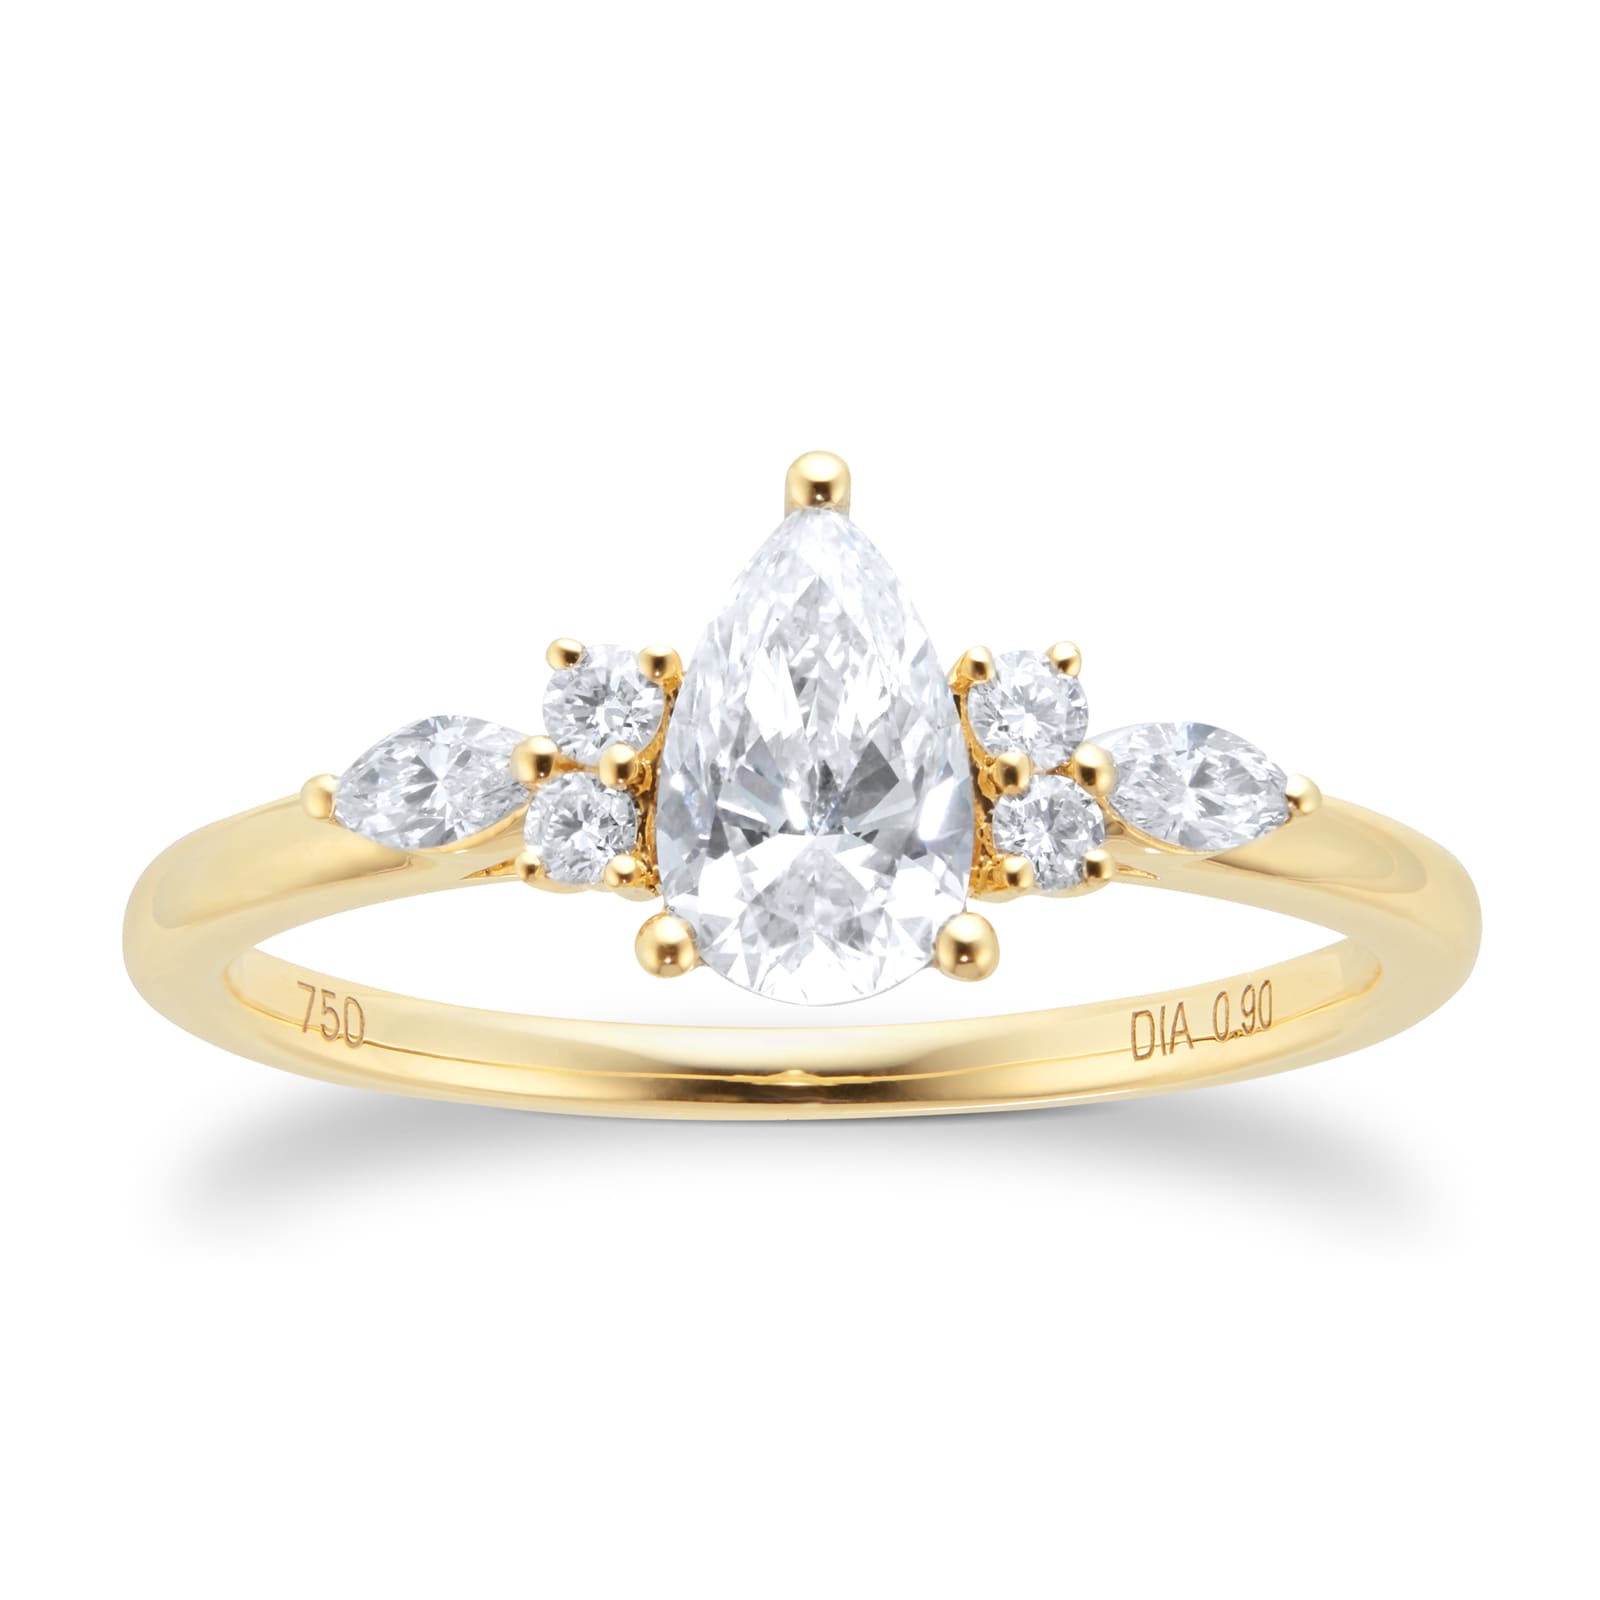 18ct Yellow Gold 0.90cttw Diamond Pear Scatter Engagement Ring - Ring Size N